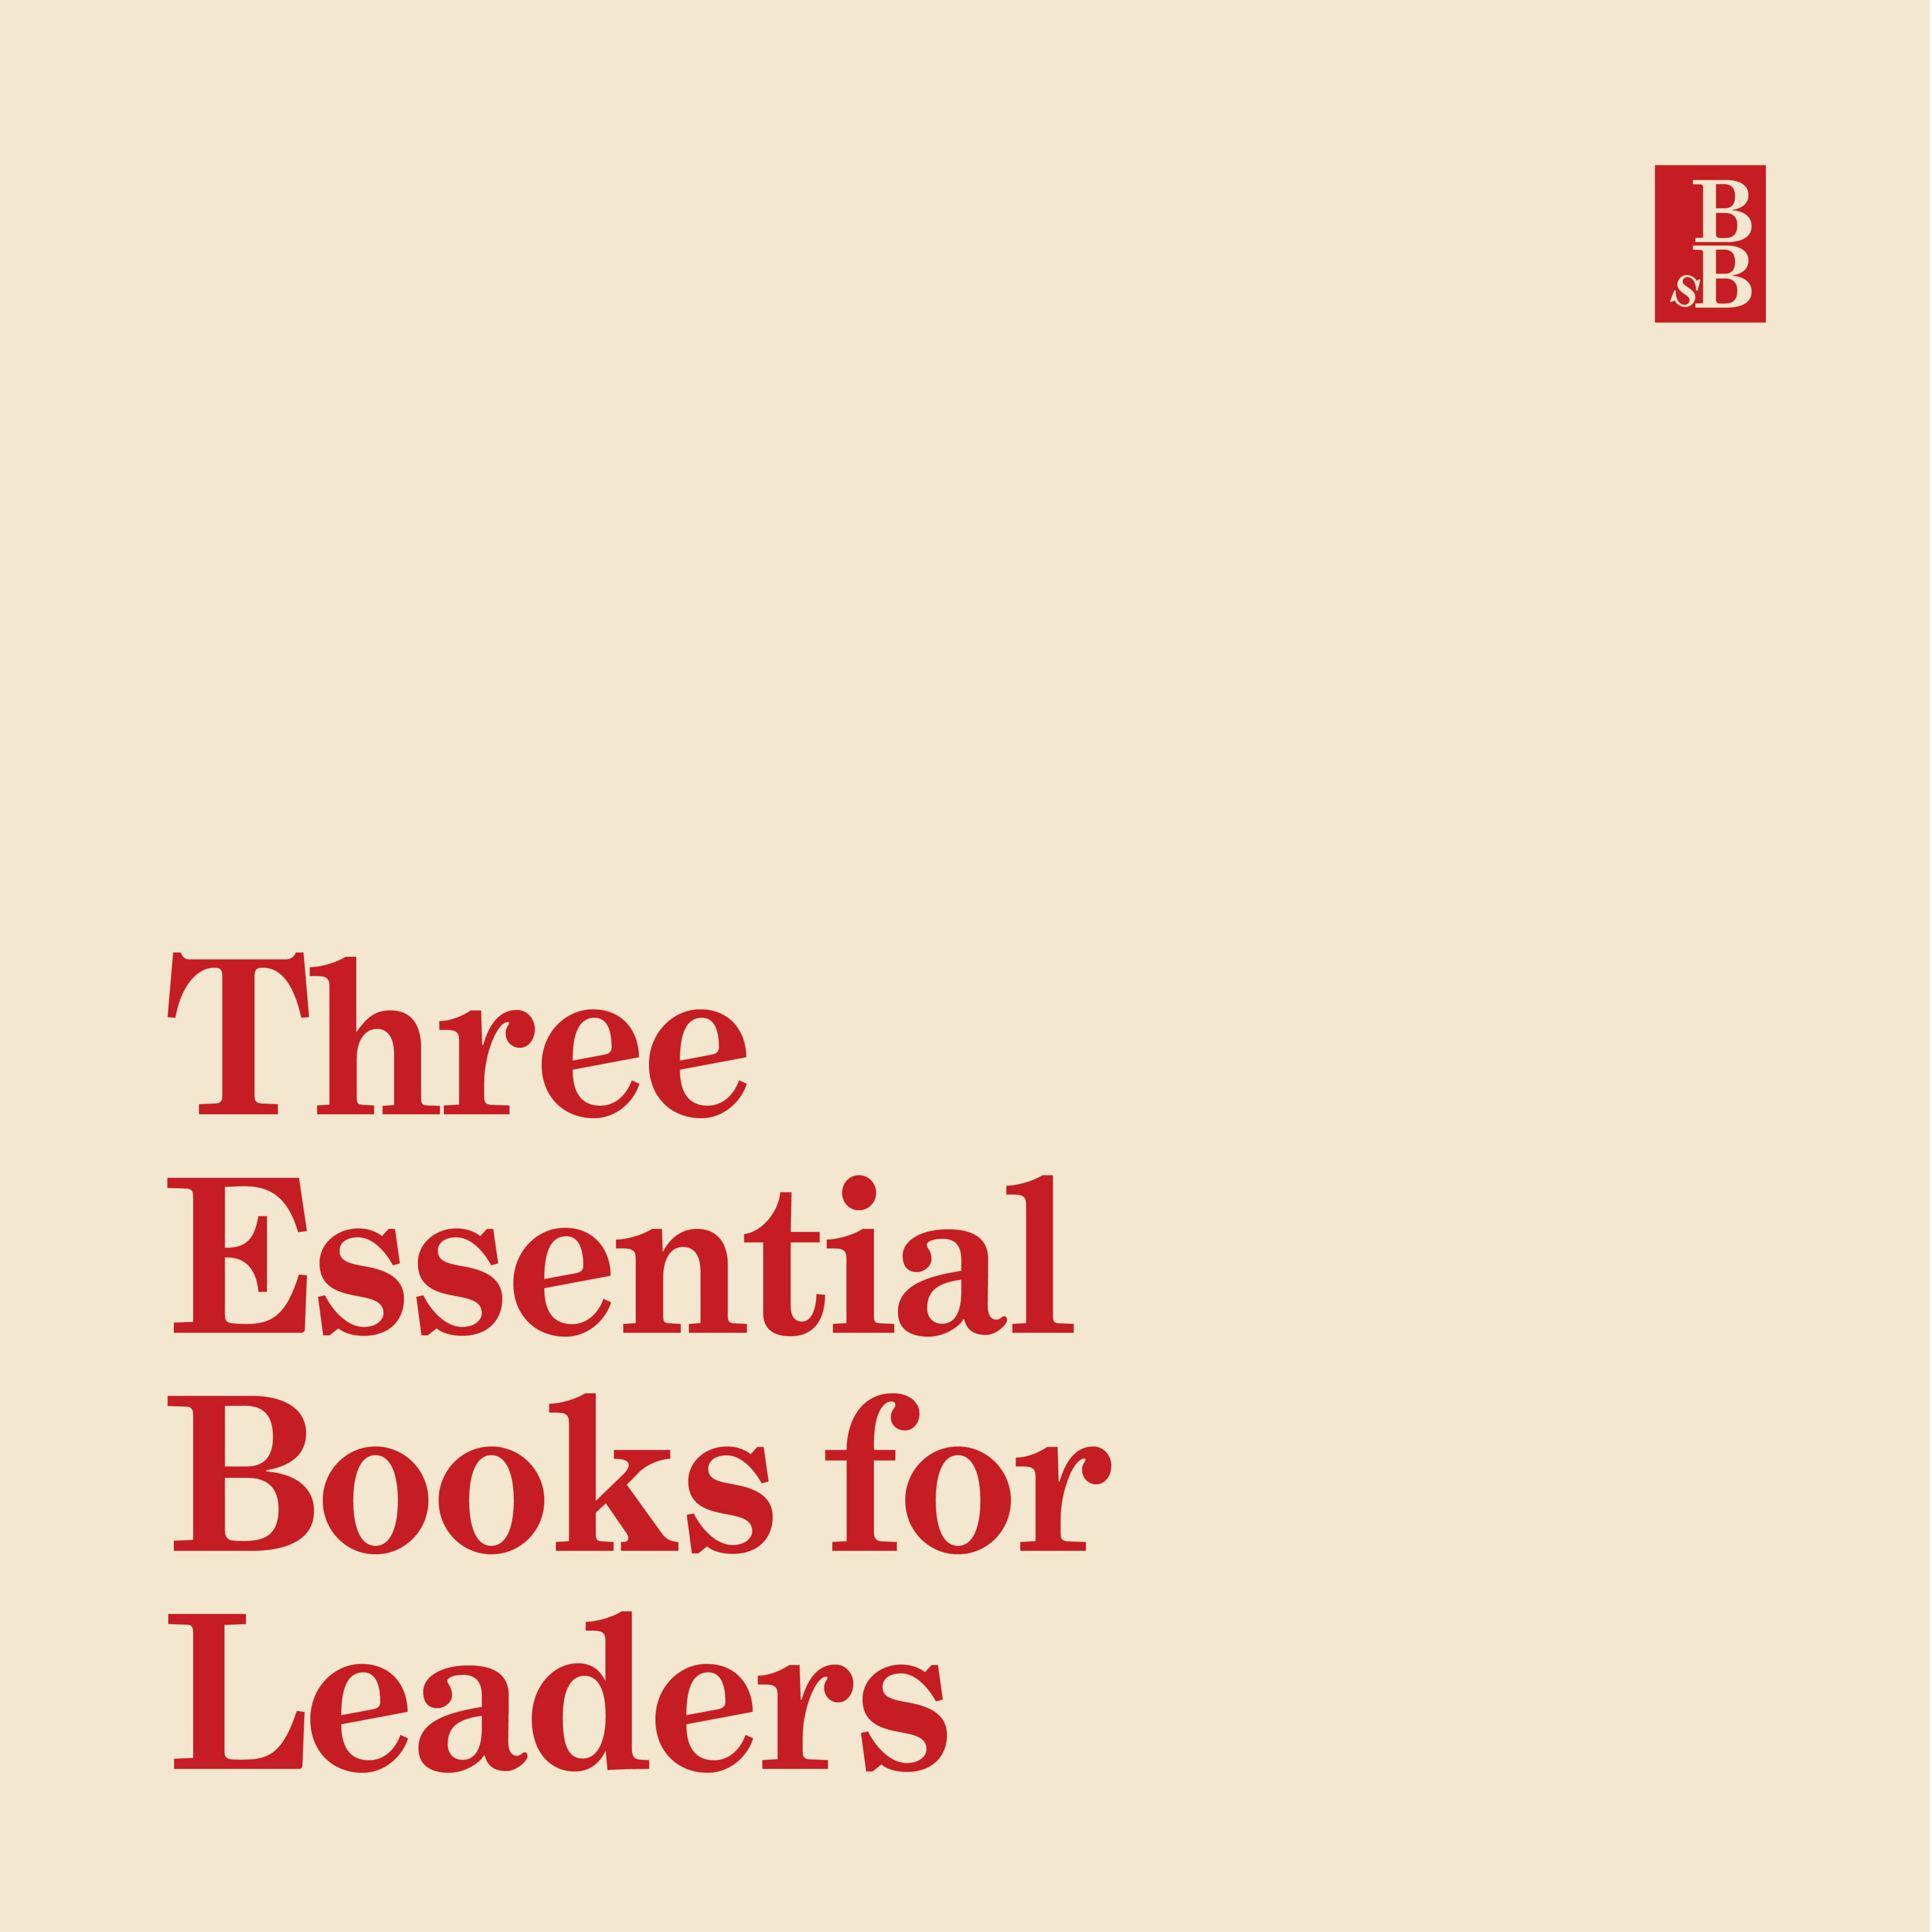 Three essential books that all leaders should read